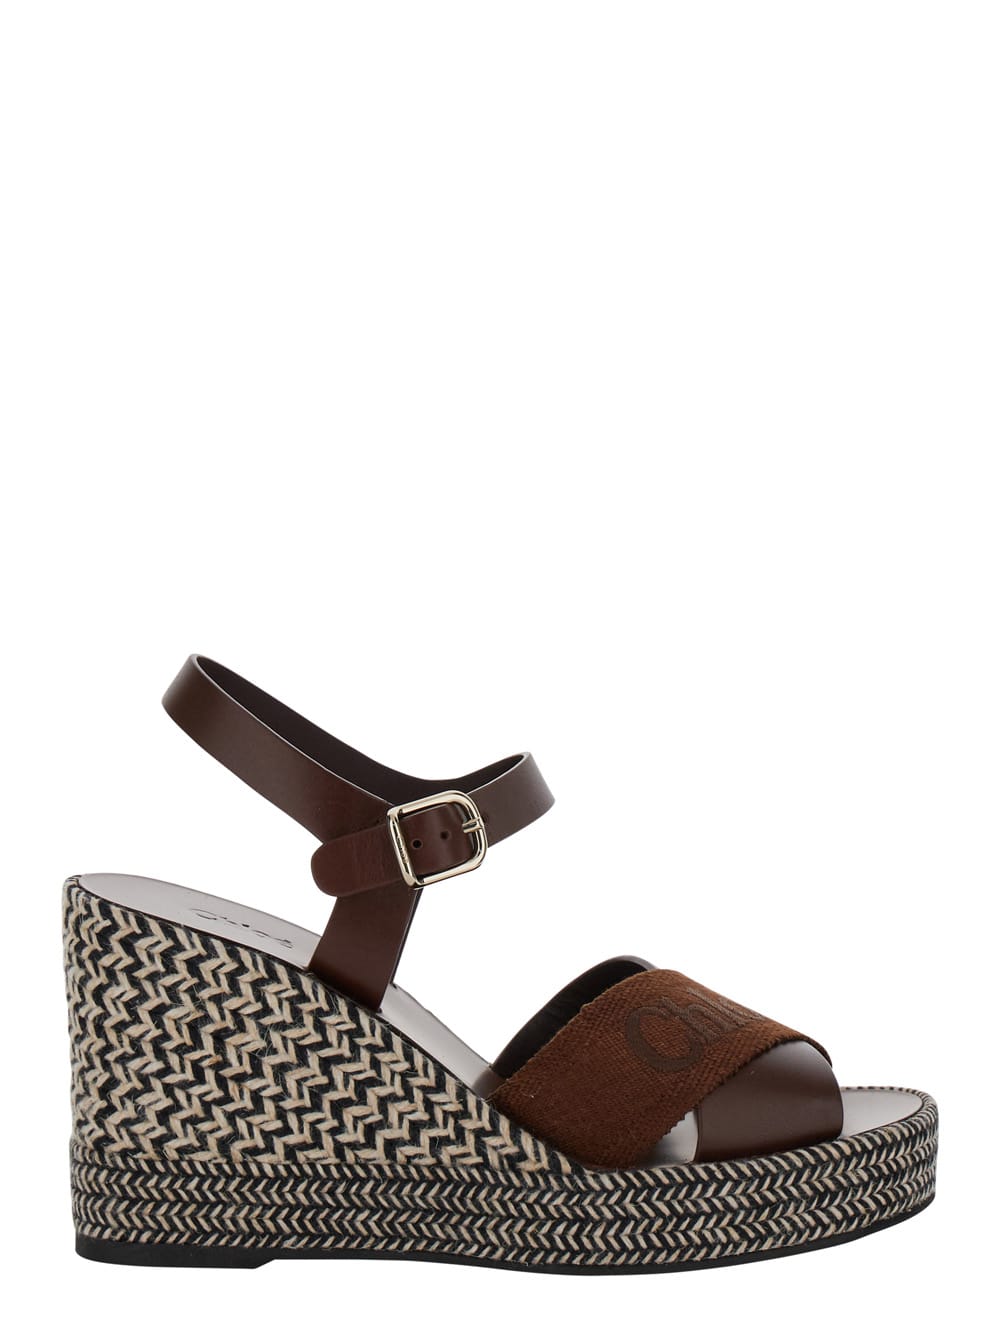 CHLOÉ PIIA BROWN ESPADRILLAS SANDALS WITH WEDGE IN LEATHER AND JUTE WOMAN